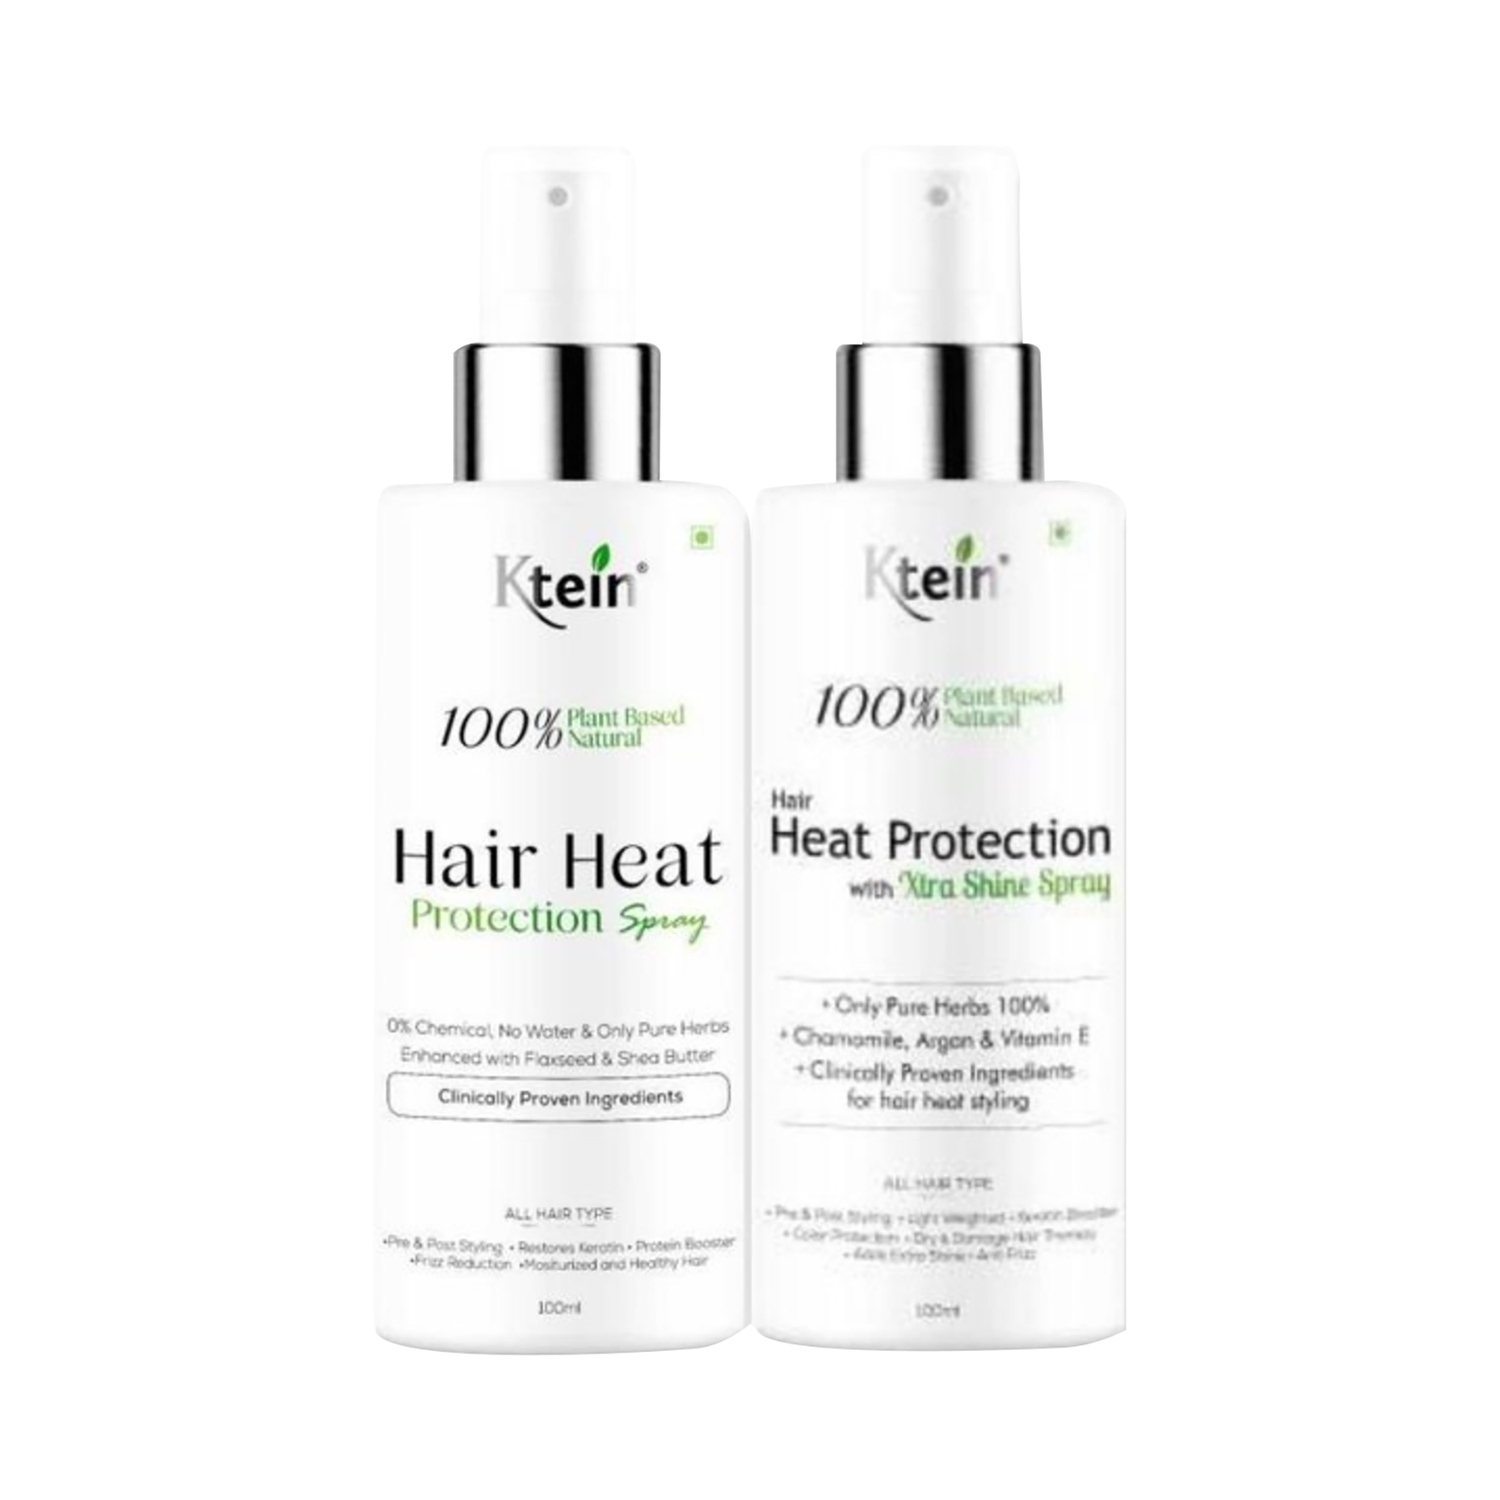 Ktein | Ktein 100% Plant Based Natural Hair Heat Protection Spray + 100% Plant Based Natural Hair Heat Protection With Xtra Shine Spray - (2Pcs)